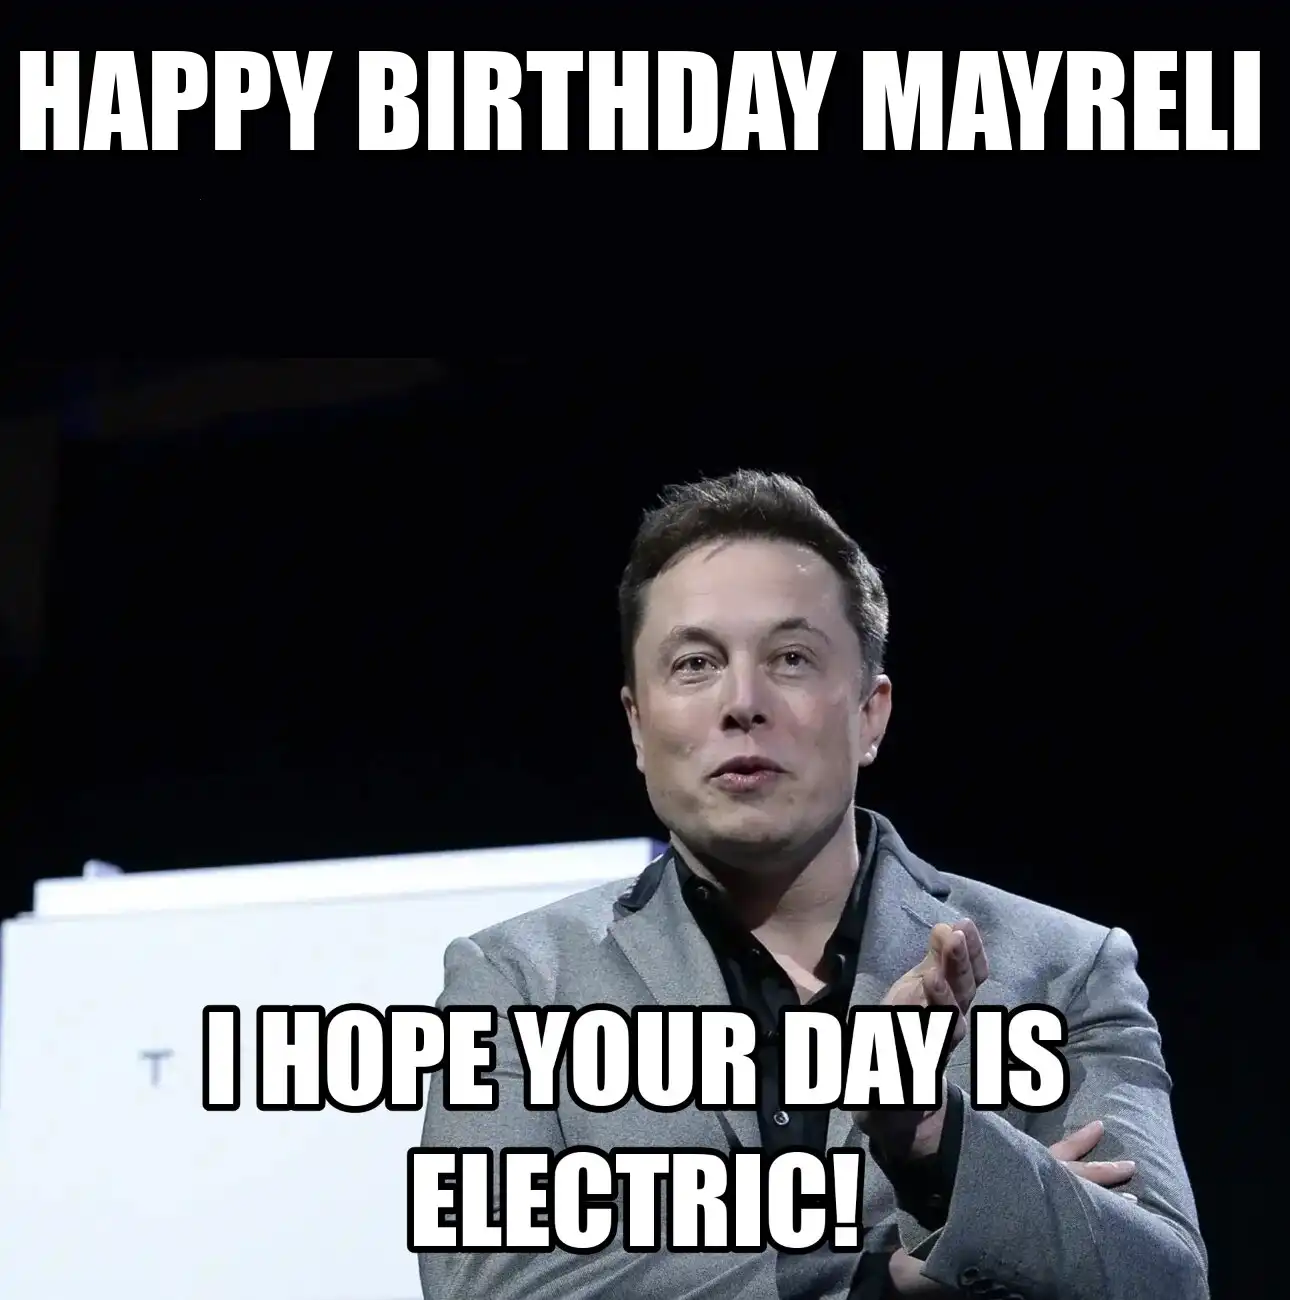 Happy Birthday Mayreli I Hope Your Day Is Electric Meme